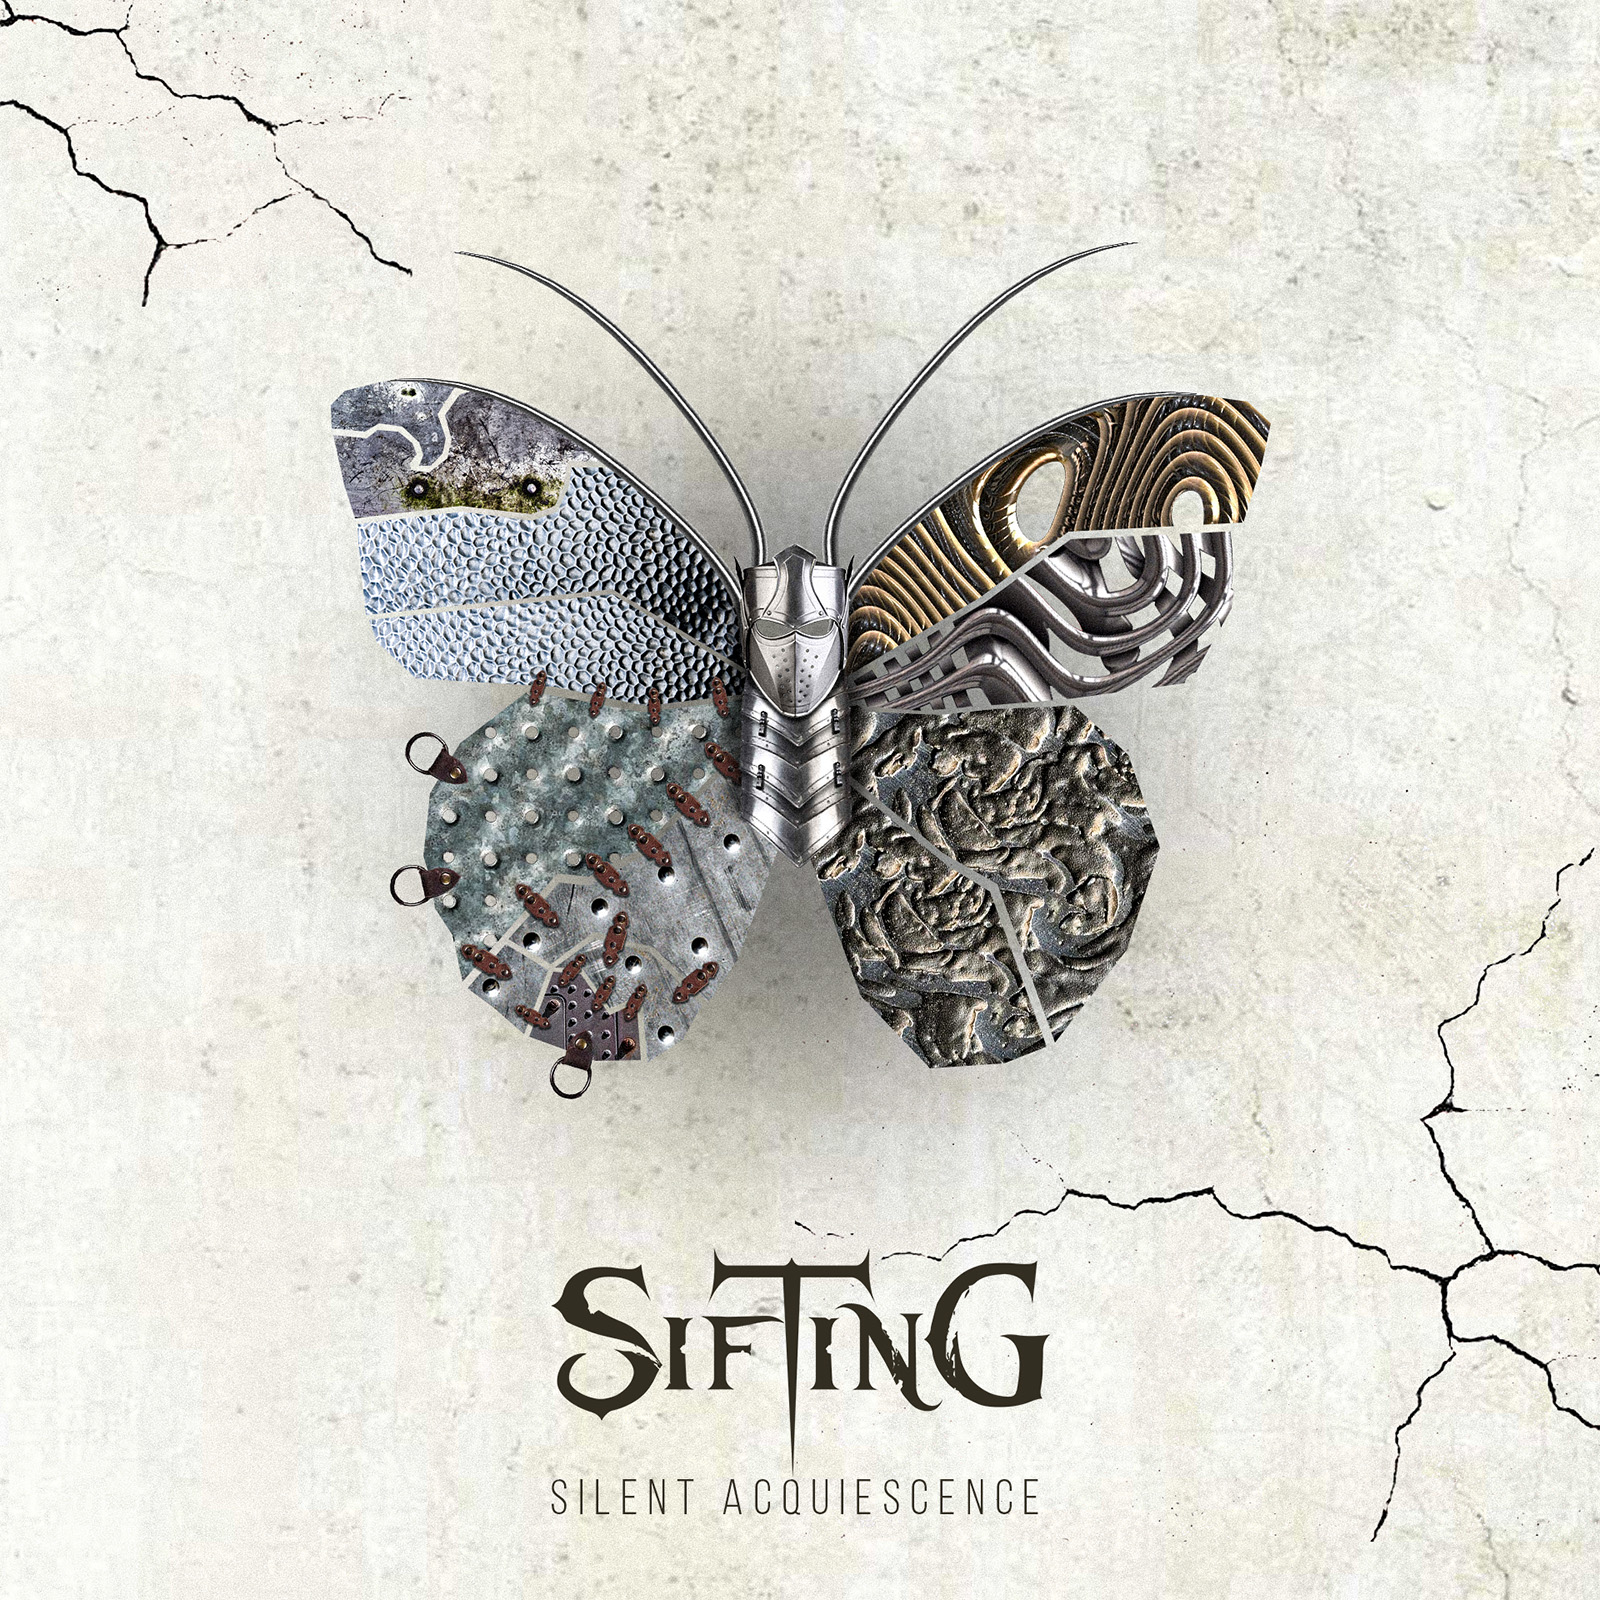 HOT TRACK: “Silent Acquiescence” by Sifting